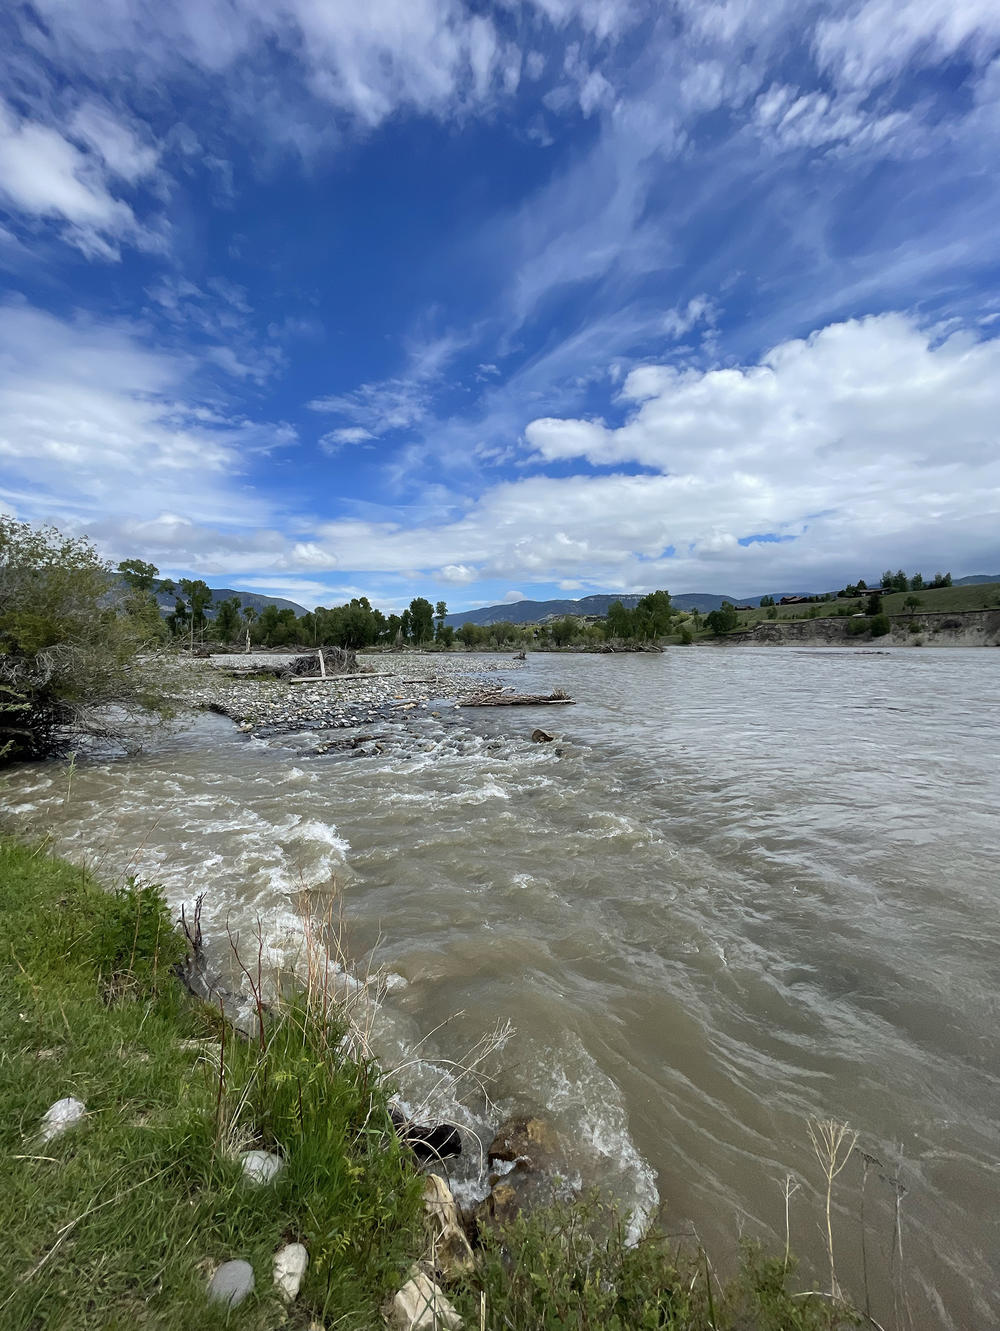 A new channel on the Yellowstone river near Livingston, Mont. that was created by flooding last year.